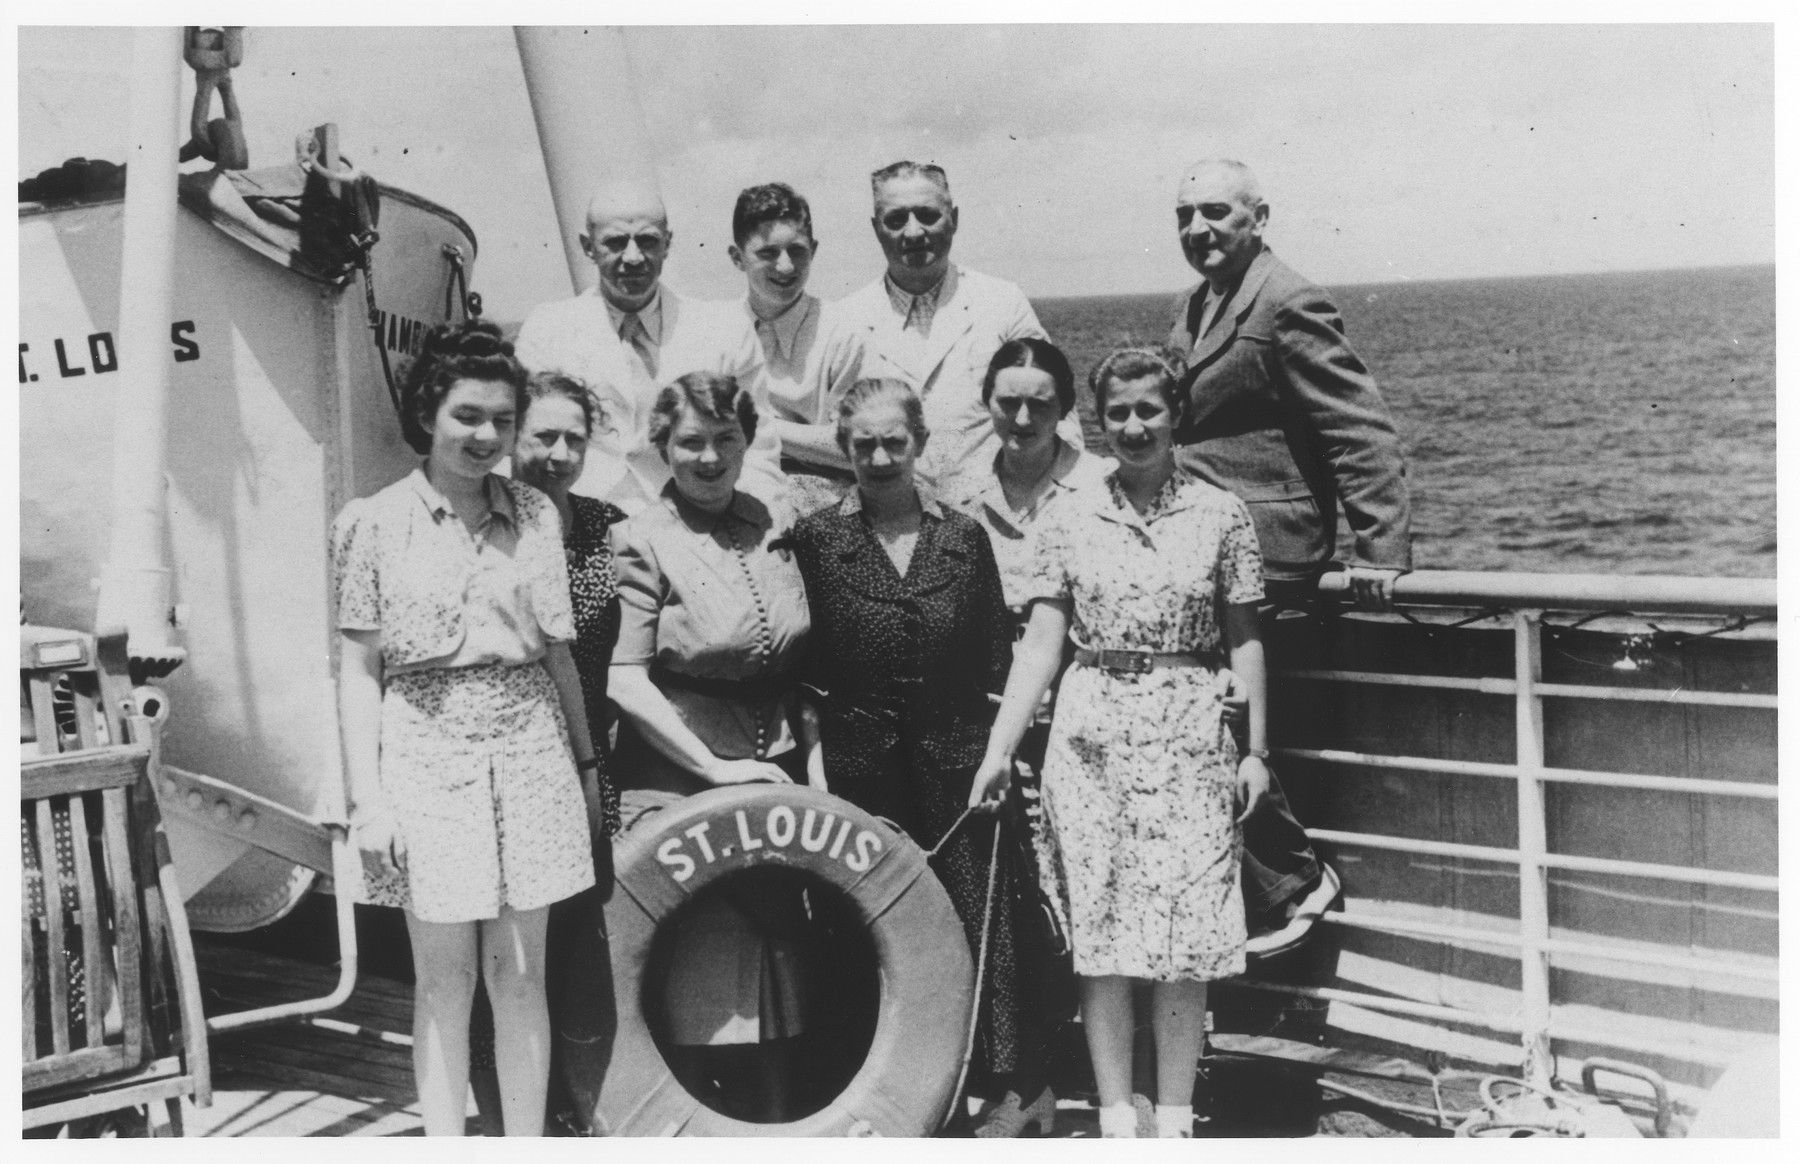 Members of the extended Heilbrun family on board the MS St. Louis.

Pictured in the front row from left to right are: Inge Heilbrun, Grete Heilbrun, Berna Heilbrun, Emma David, and Johanna Heilbrun.  In the back row are Bruno Heilbrun, Guenther Heilbrun, Norbert Heilbrun and Leon Heilbrun.